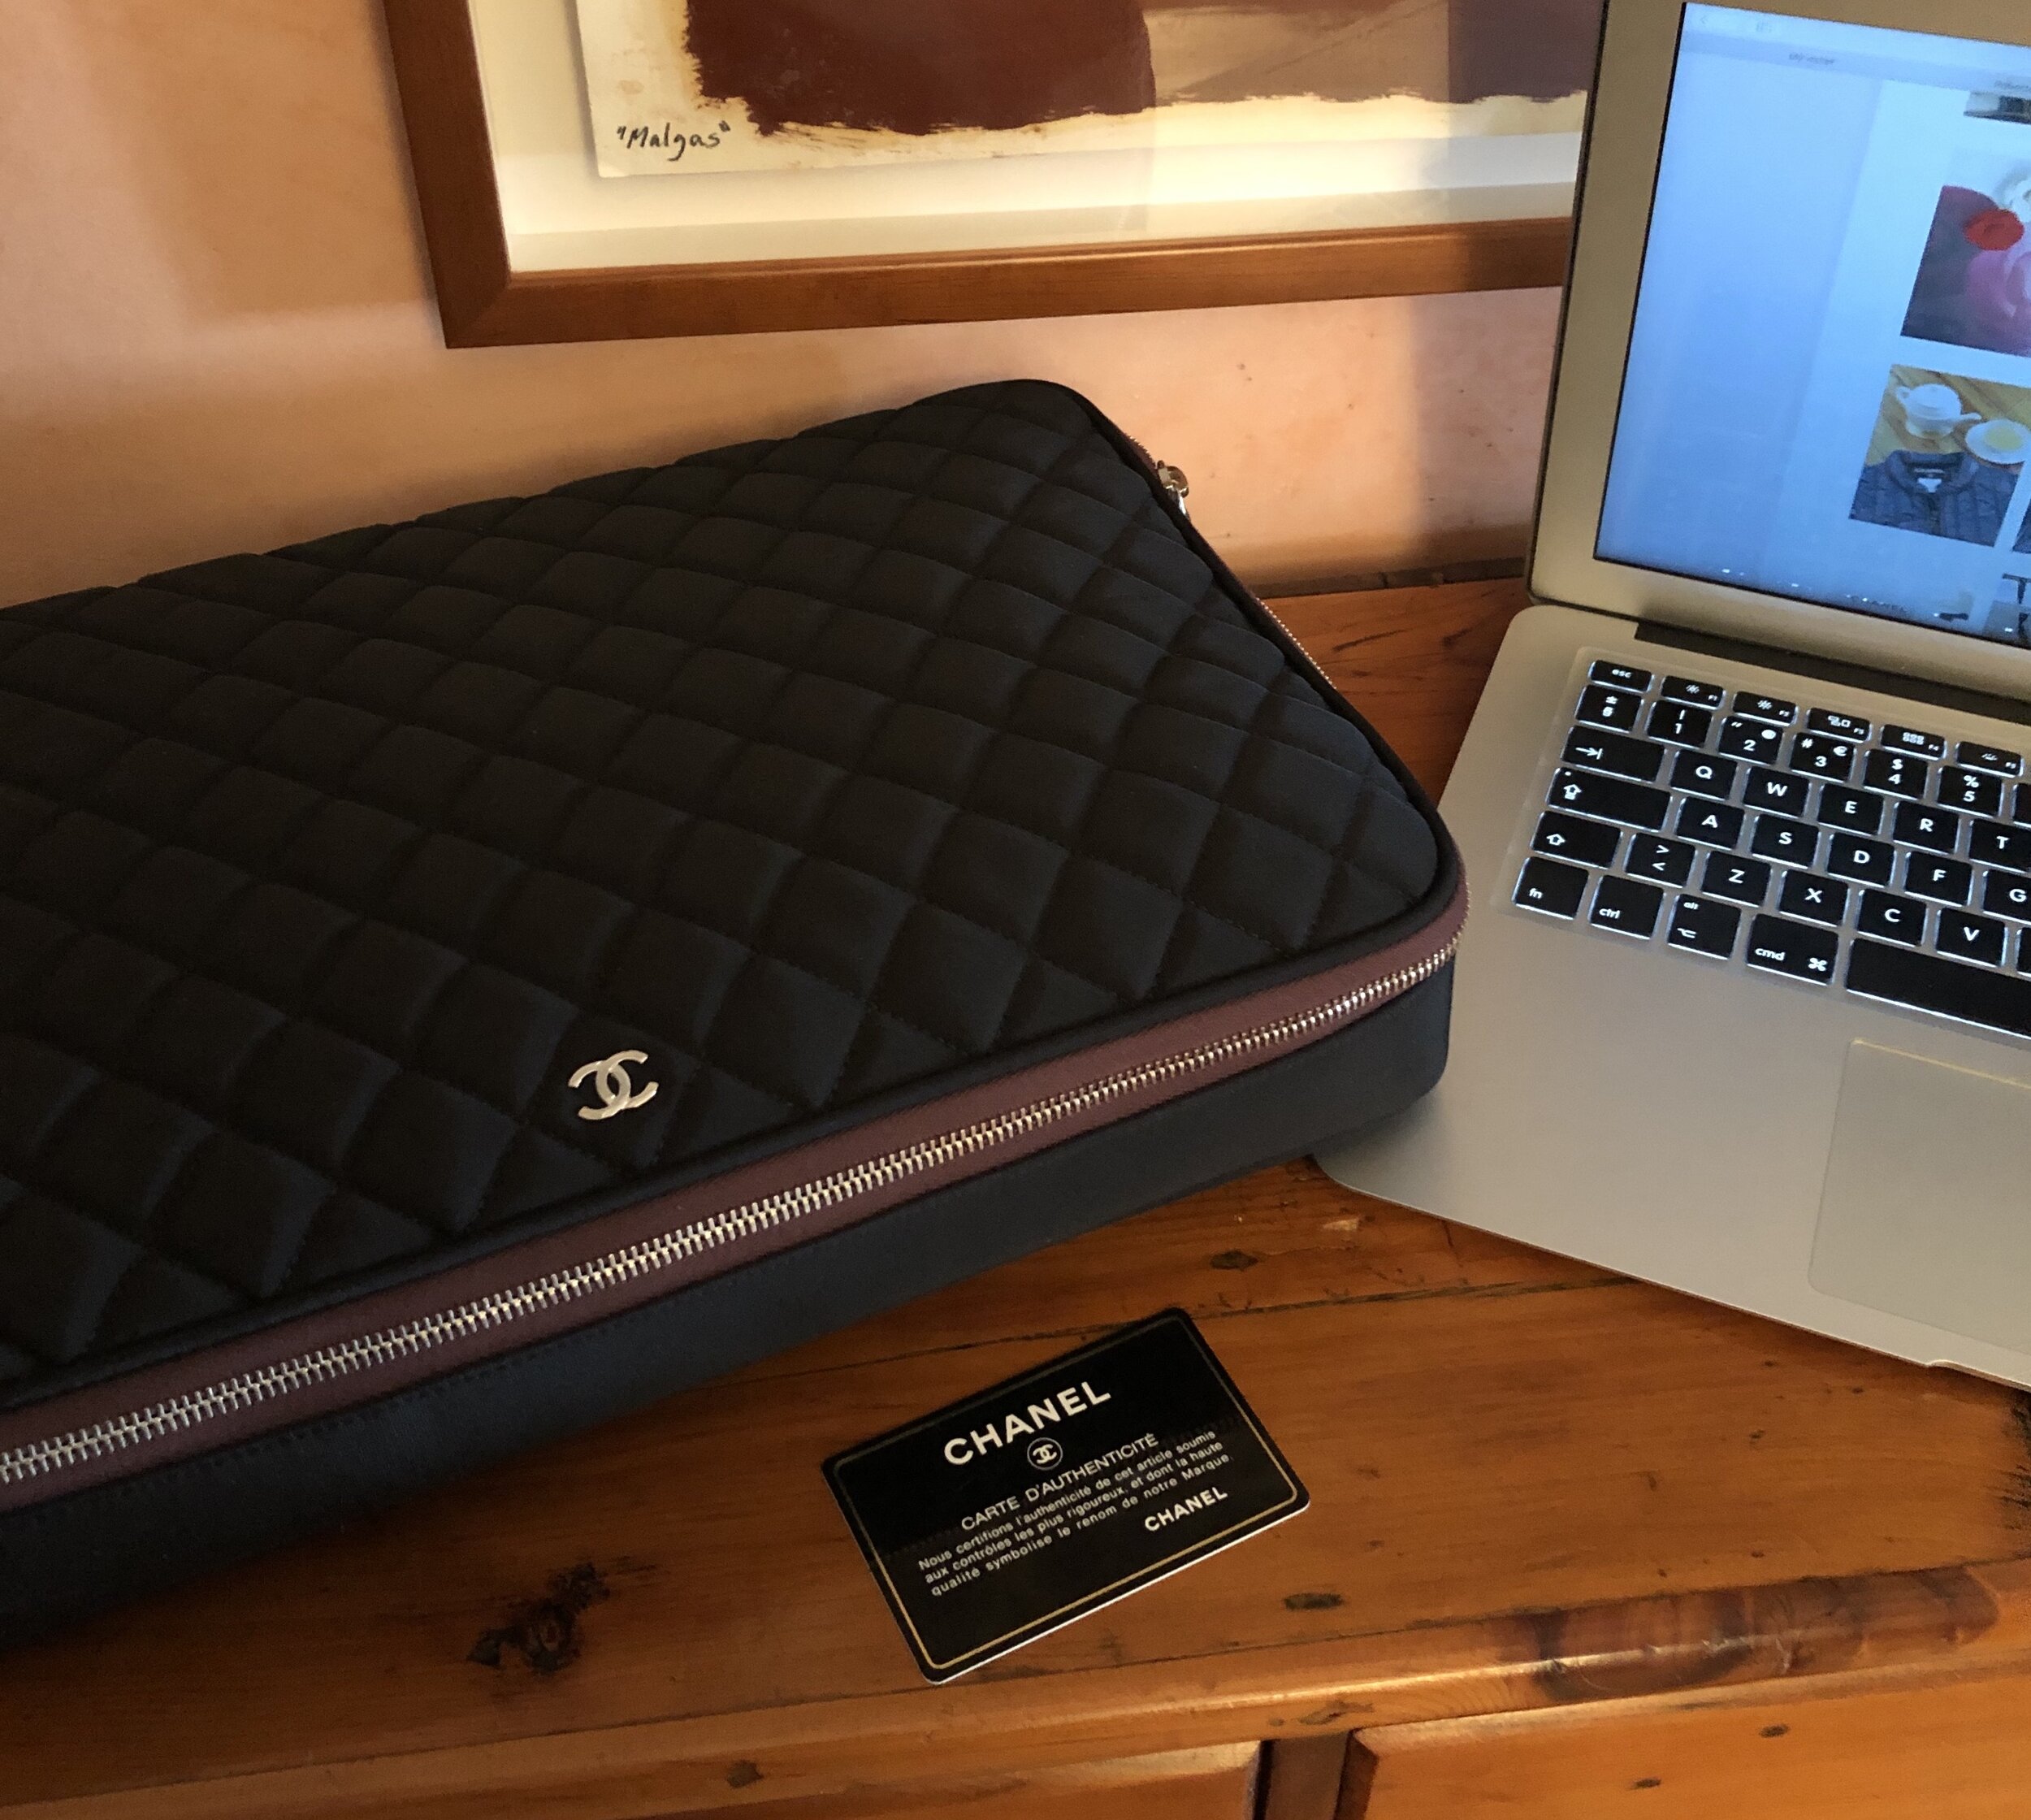 CHANEL, Accessories, Chanel Quilted Laptop Case